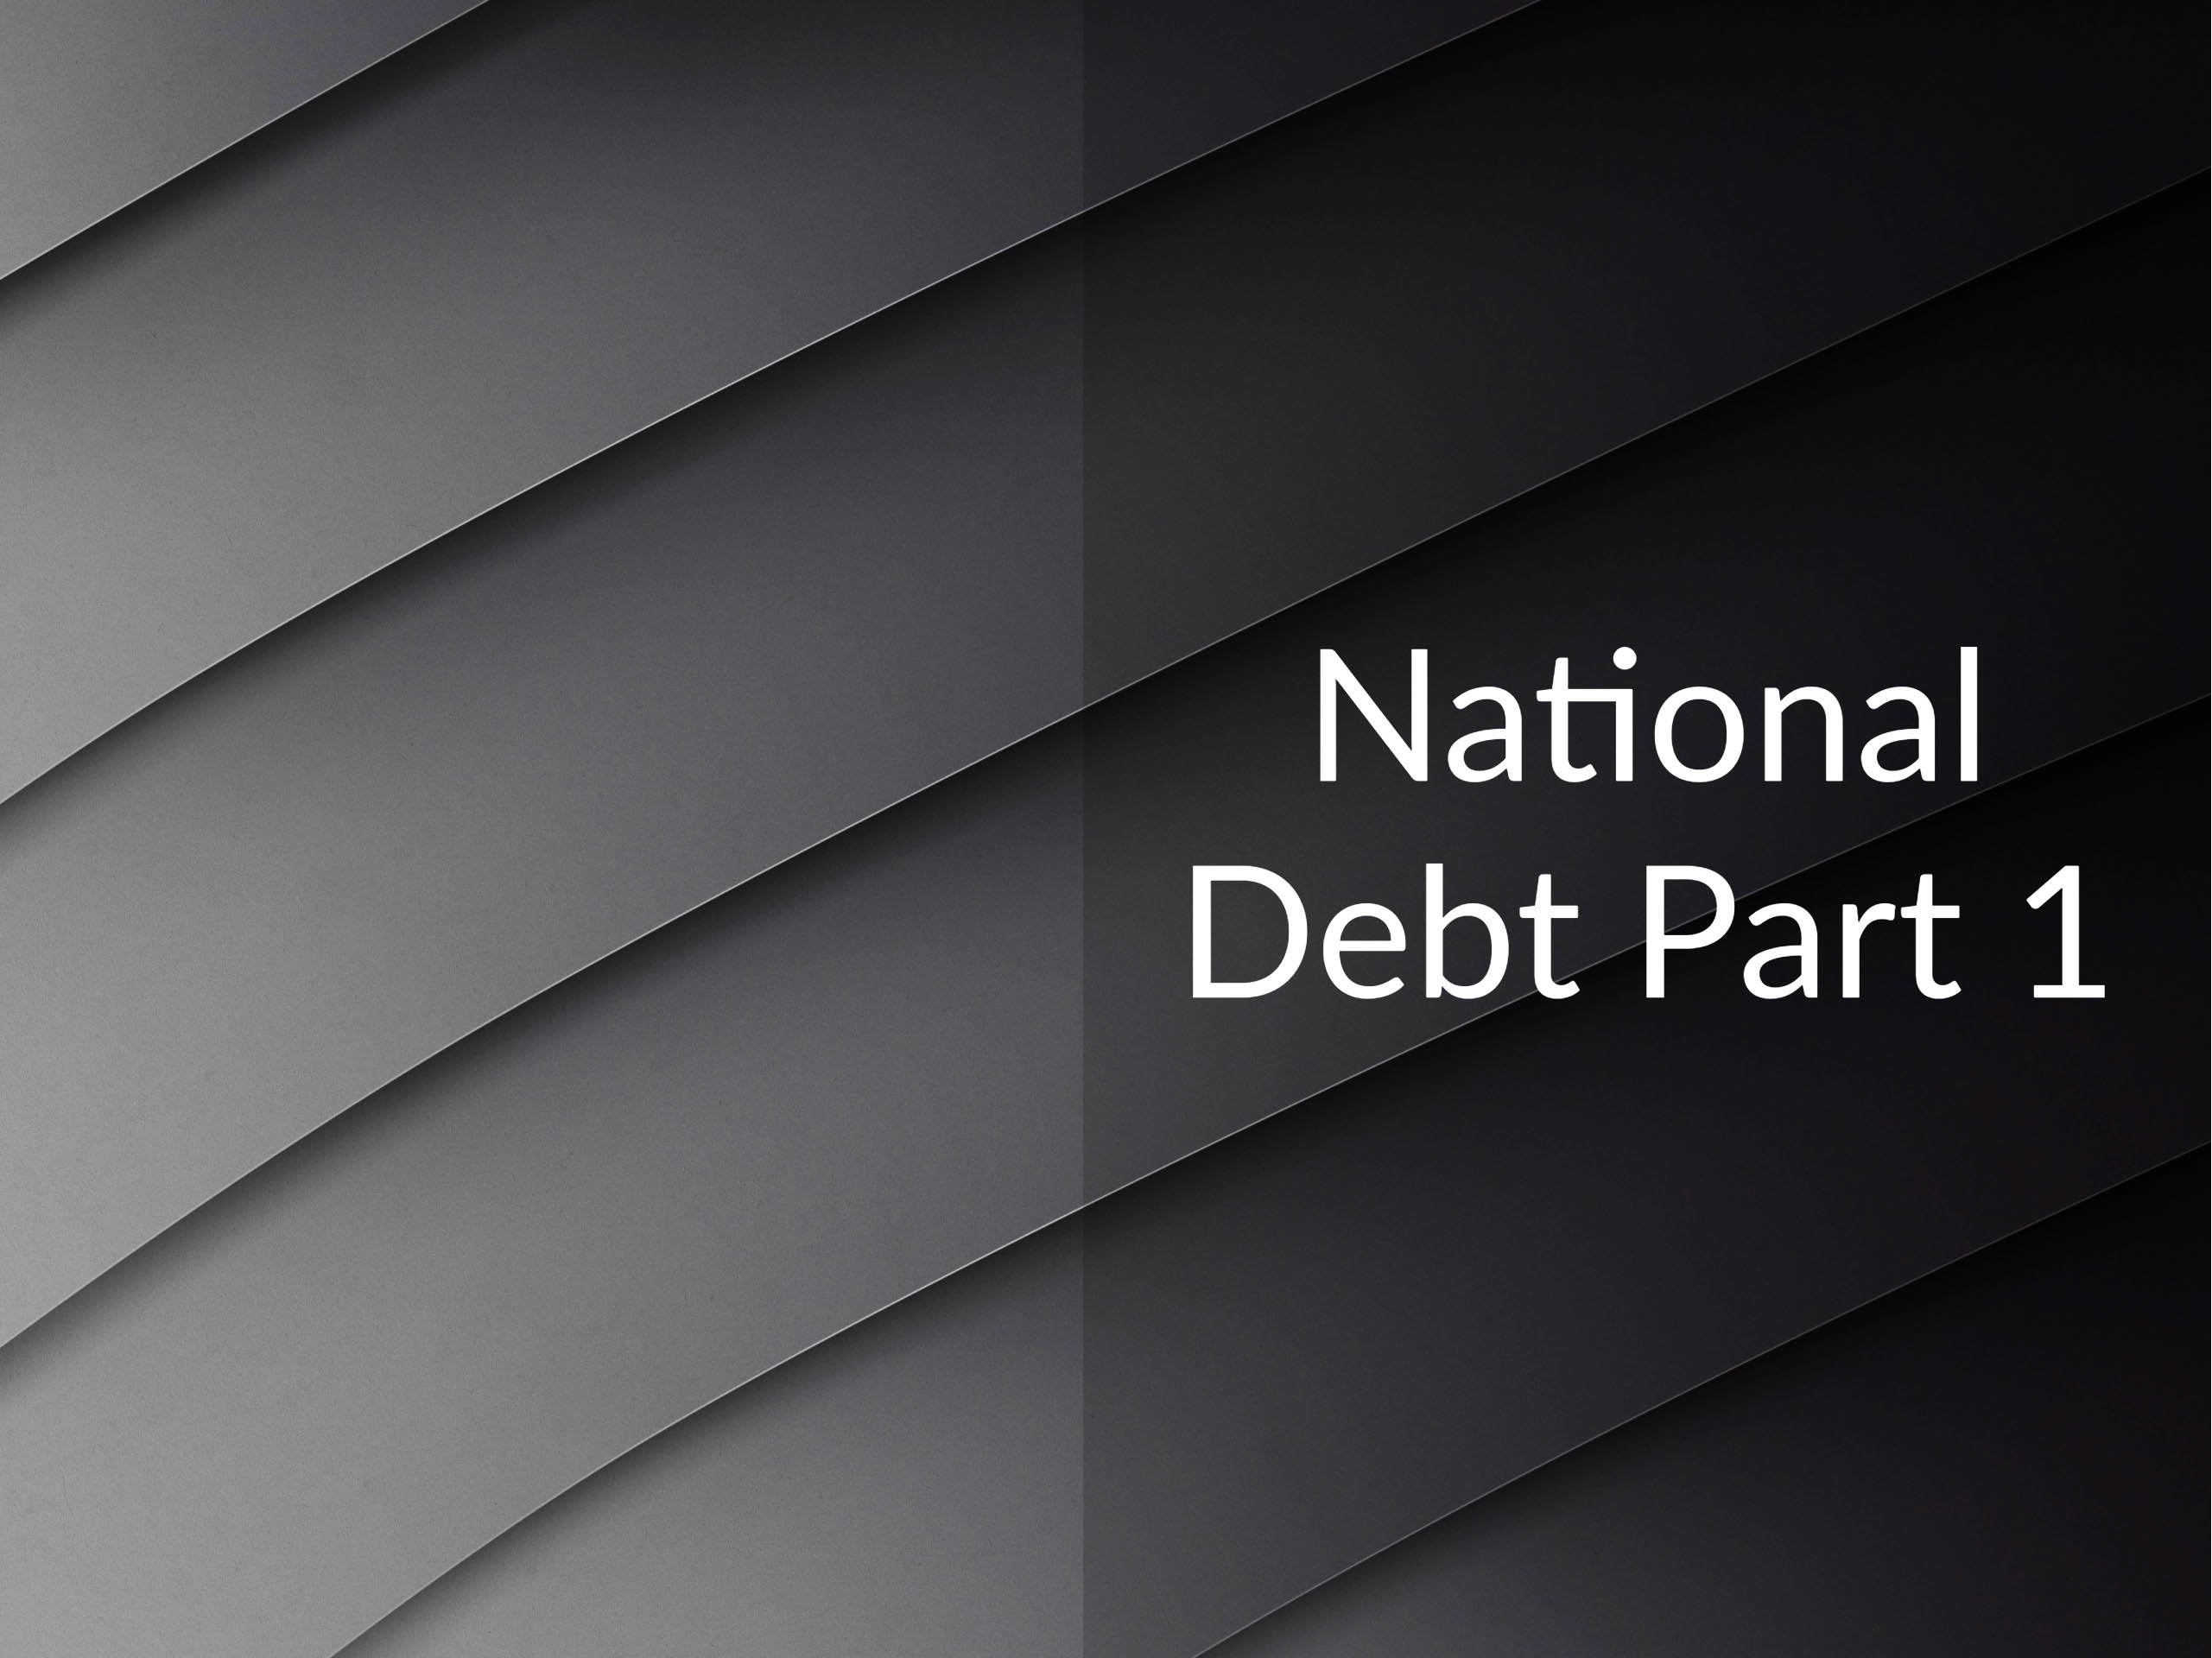 Abstract architecture with the caption "National Debt Part 1"